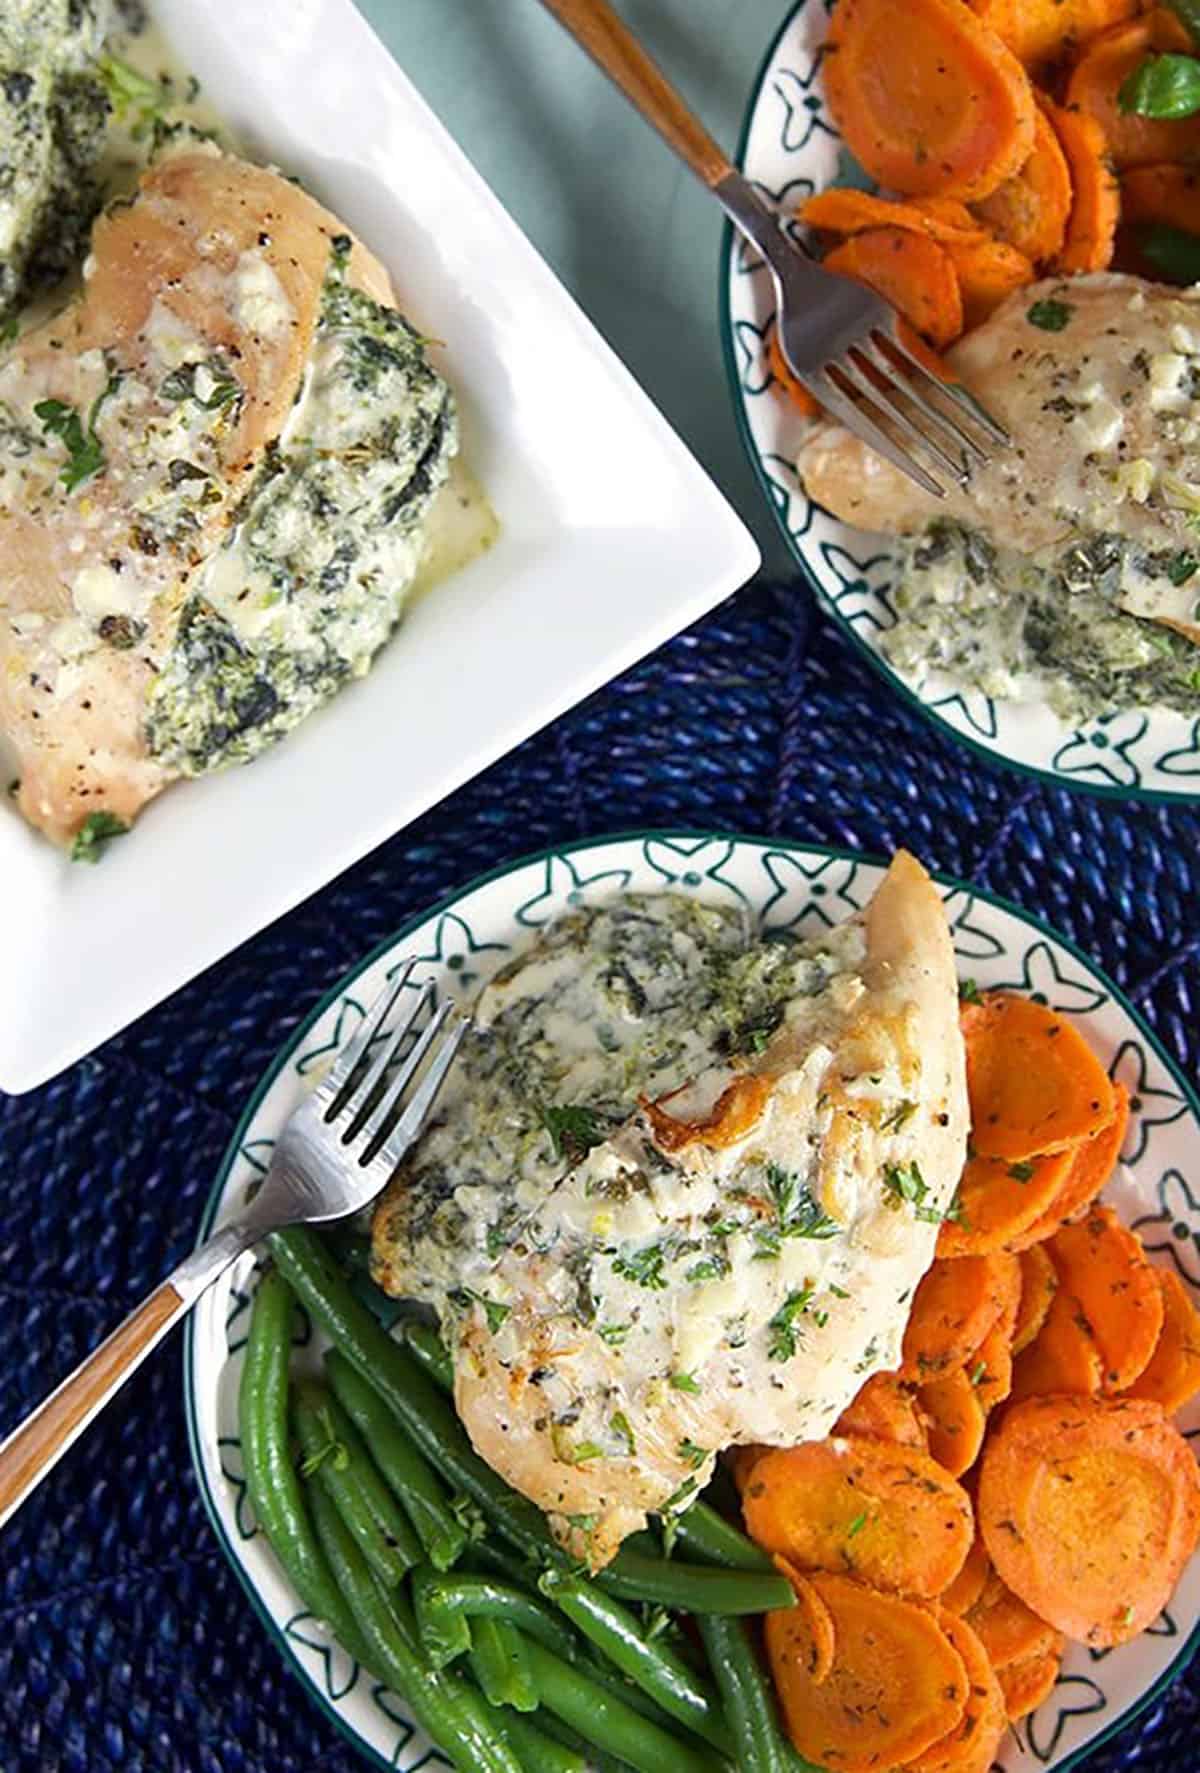 Overhead shot of spinach stuffed chicken breasts on plates with carrots and green beans.